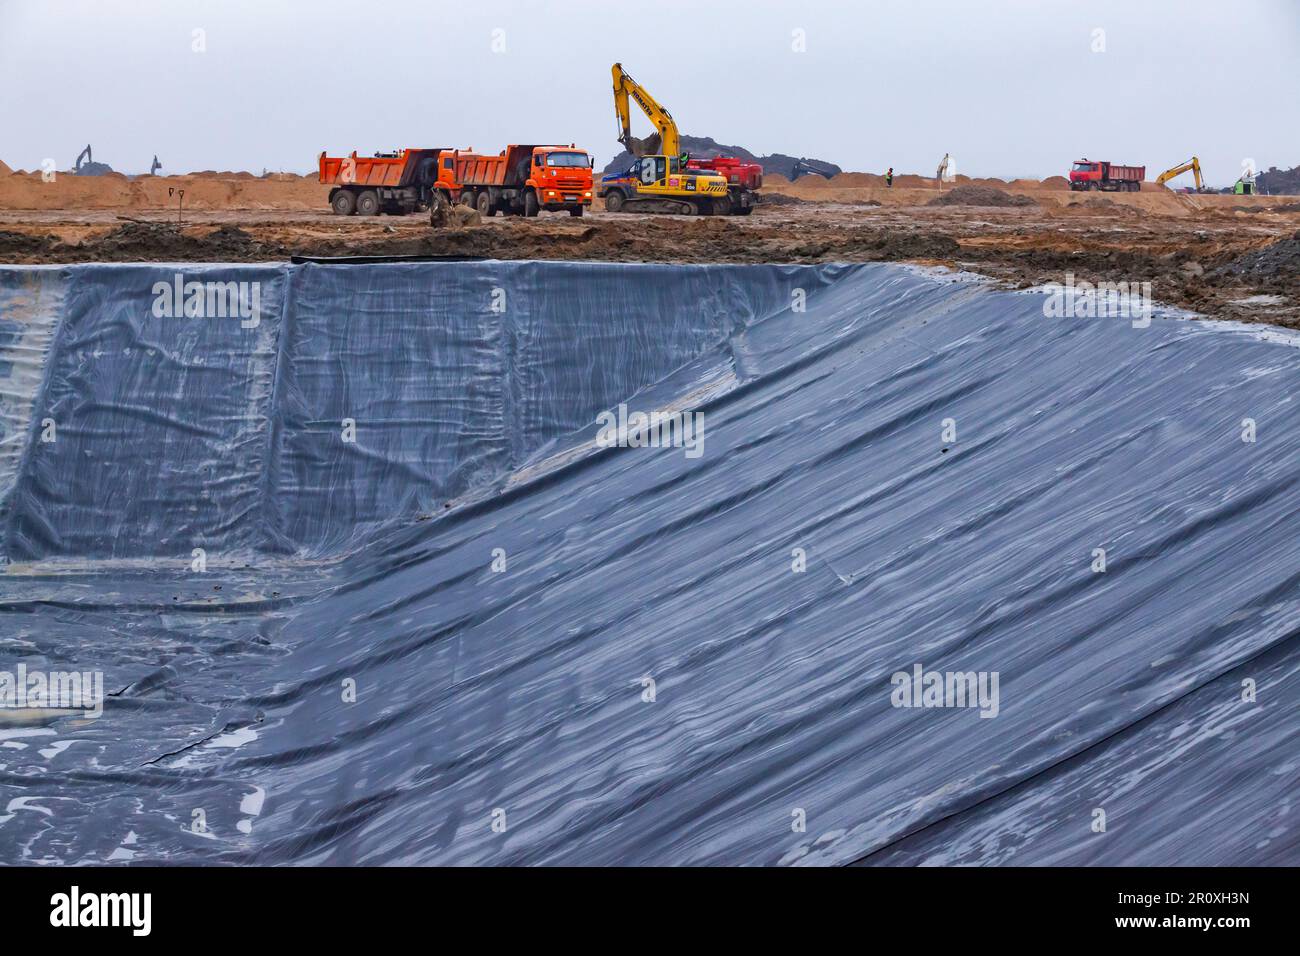 Ust-Luga, Leningrad oblast, Russia - November 16, 2021: Construction of chemical waste ditch (on front). Plastic cover of pit. Excavator and dump truc Stock Photo